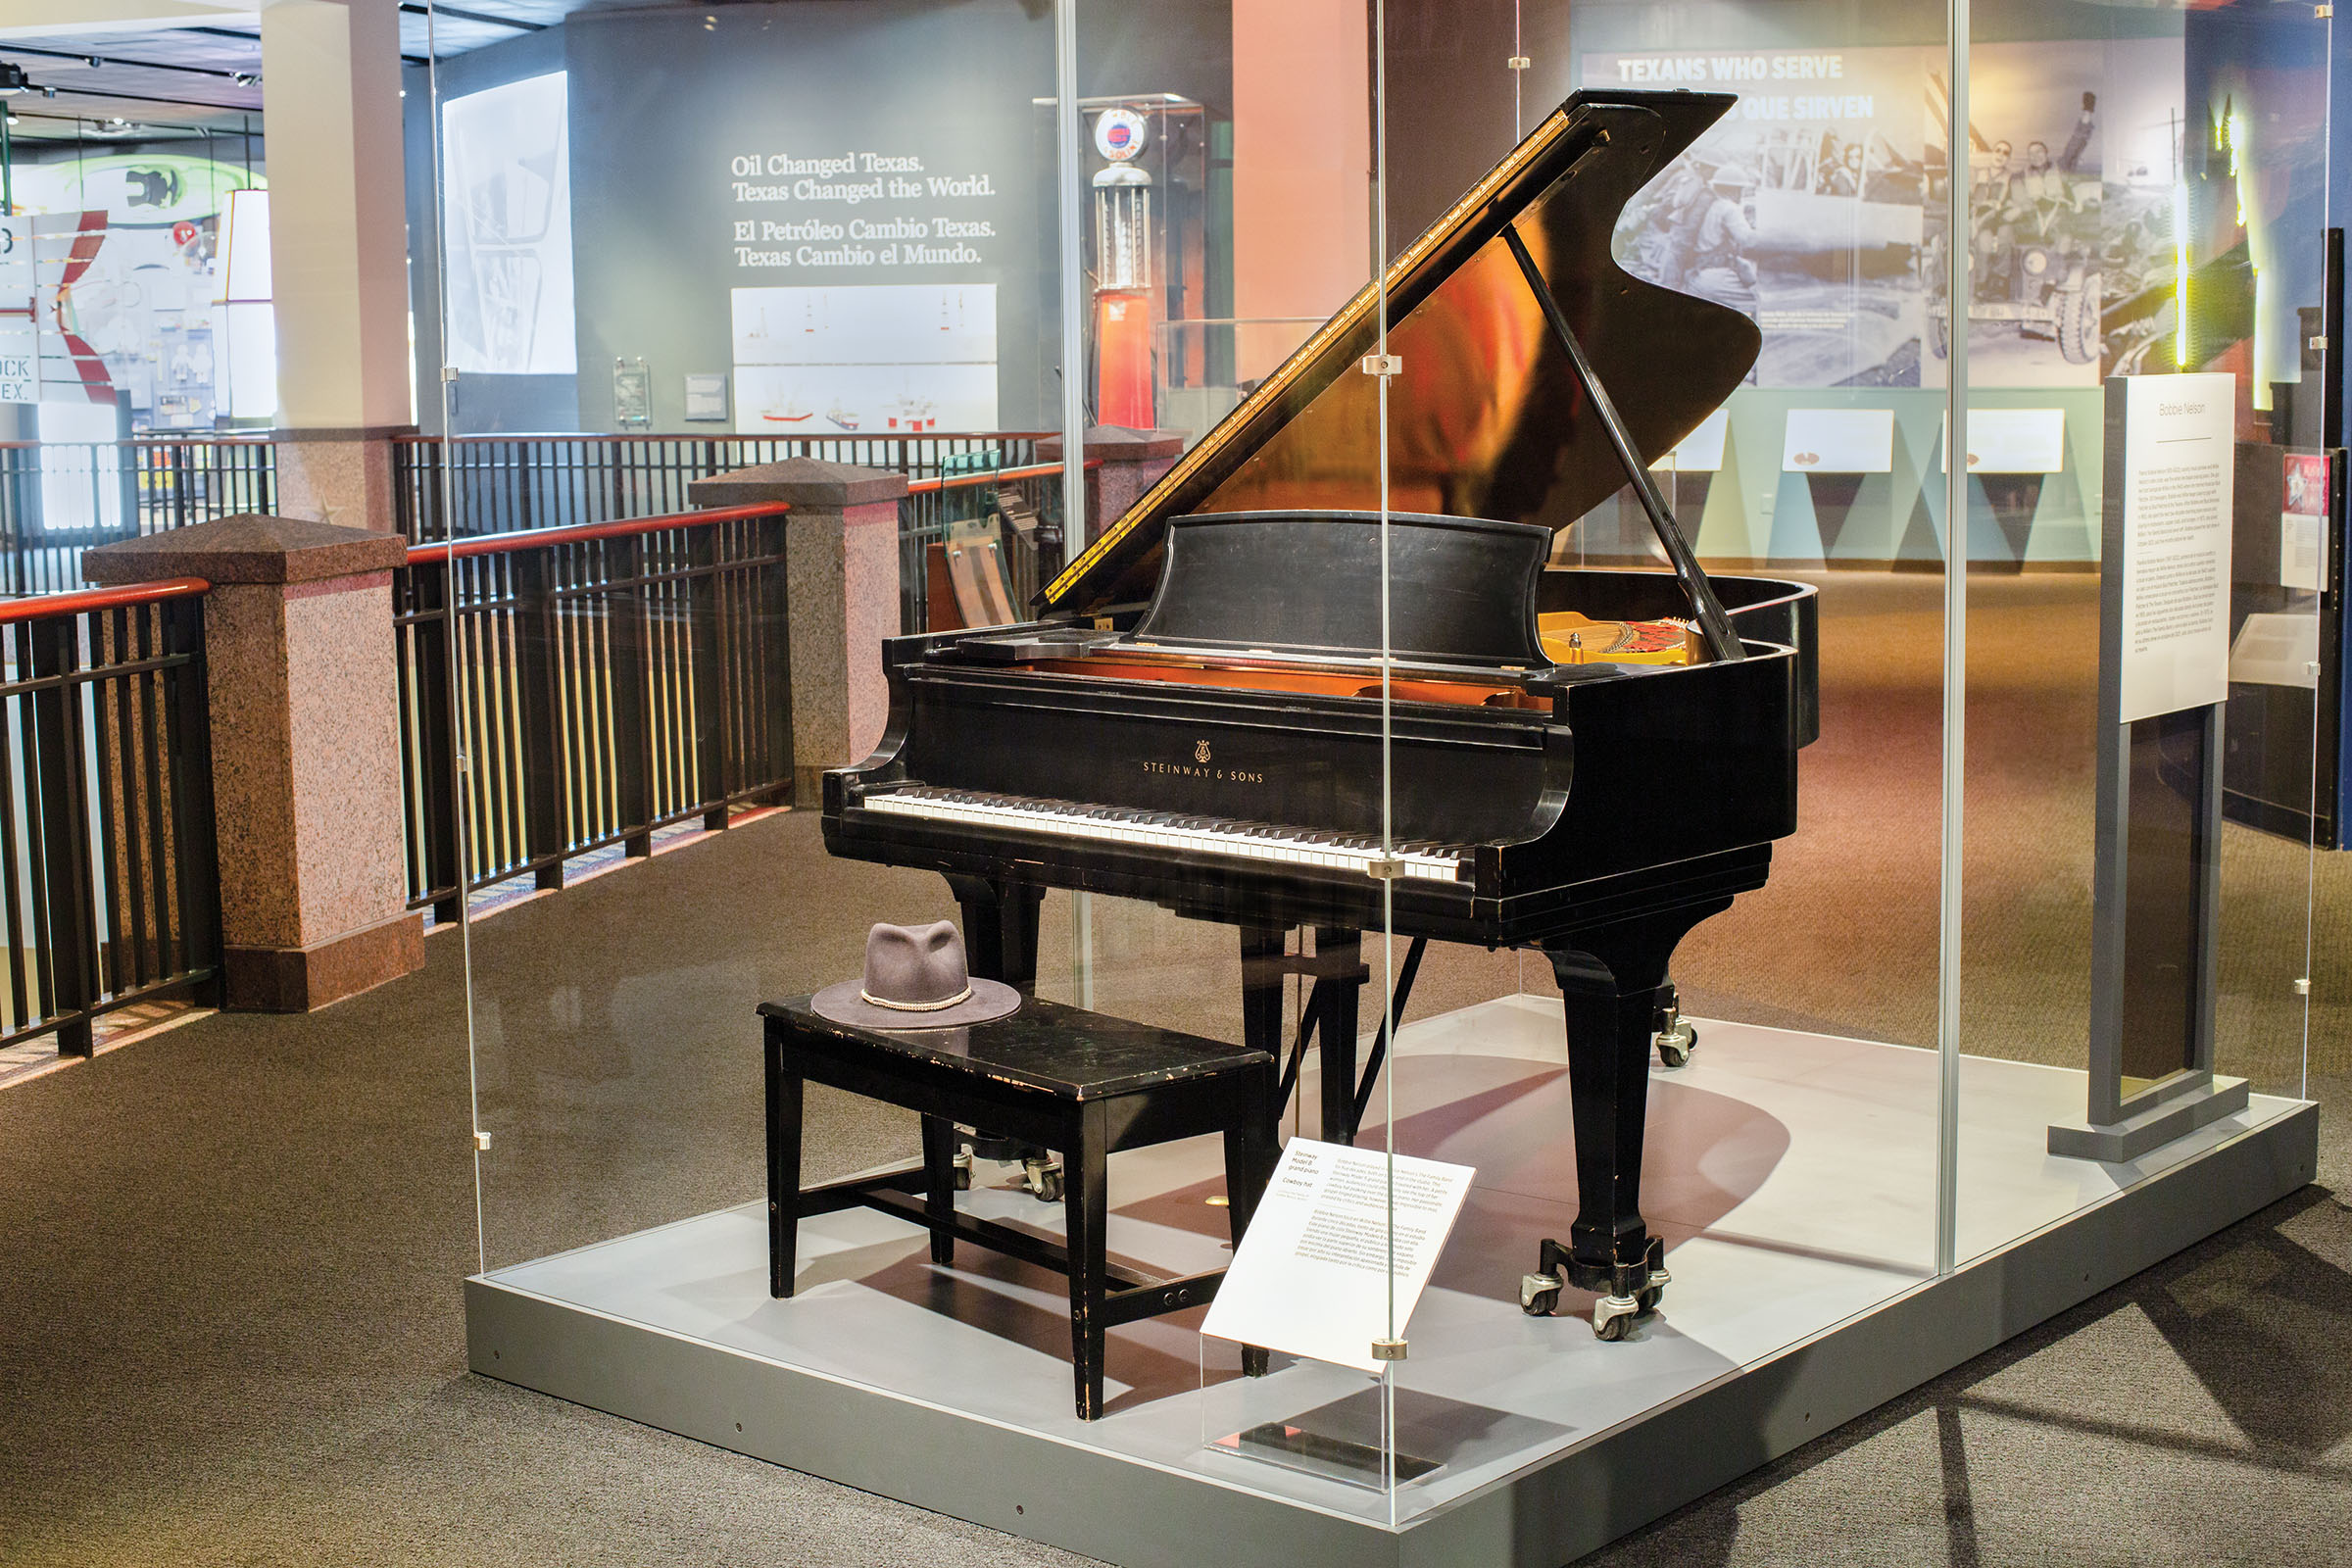 A large black grand piano contained inside of a plexiglass case in a museum